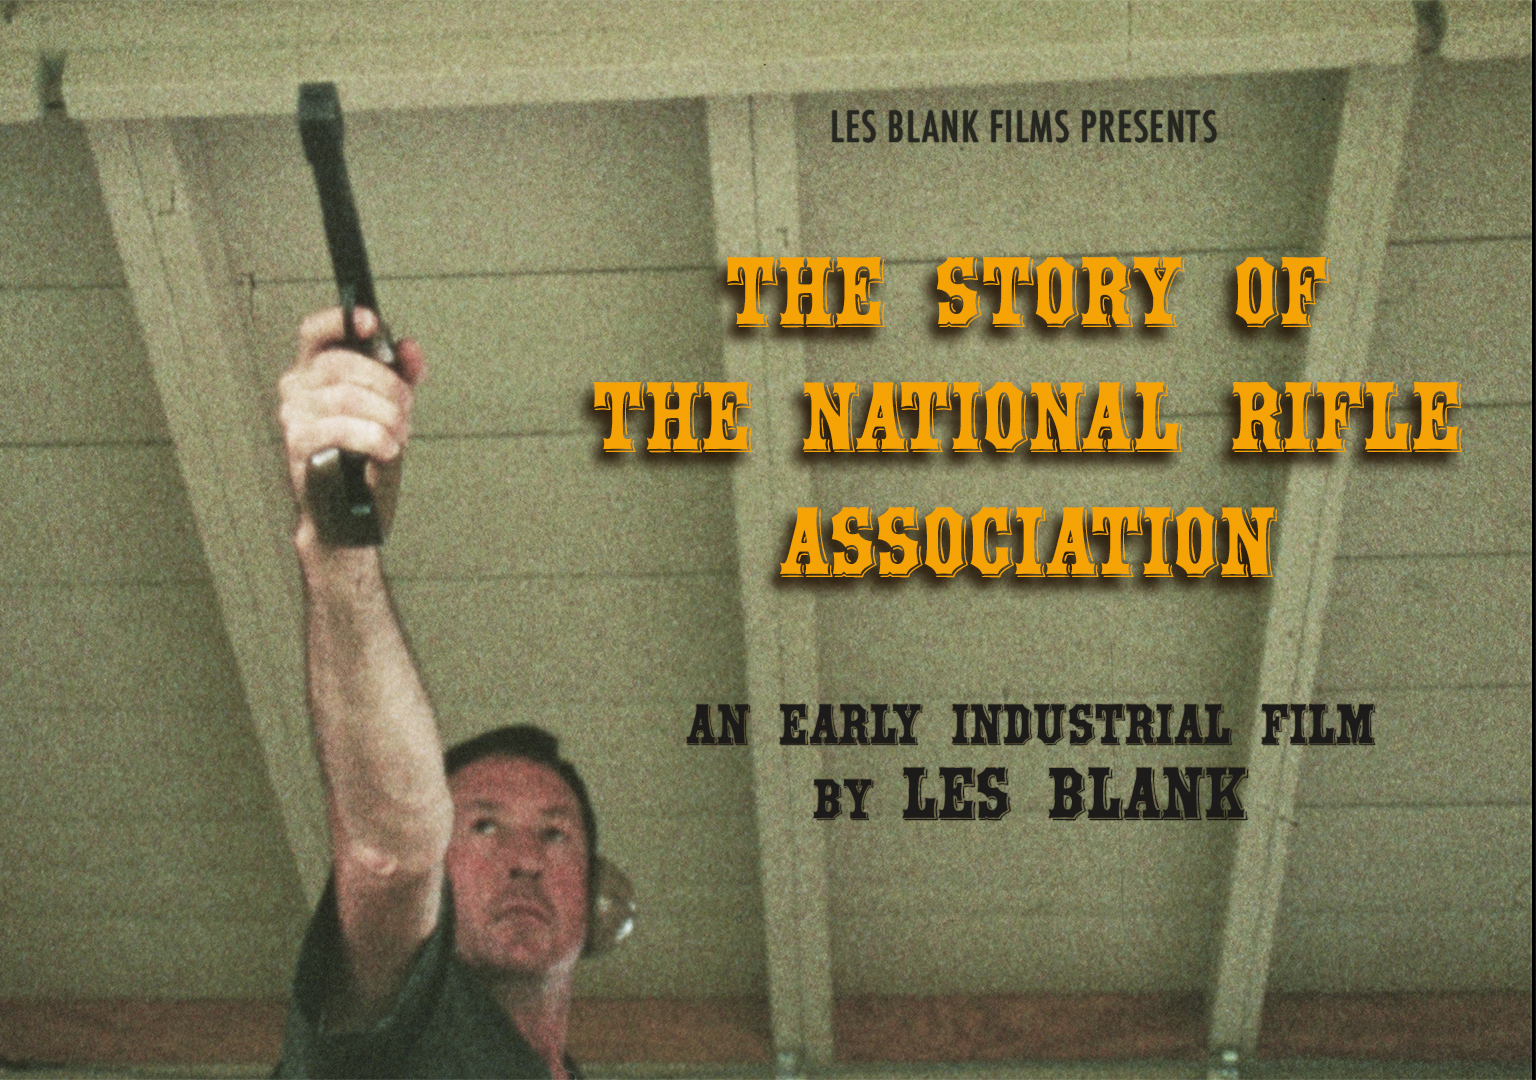 The Story of the NRA (National Rifle Association) 1968